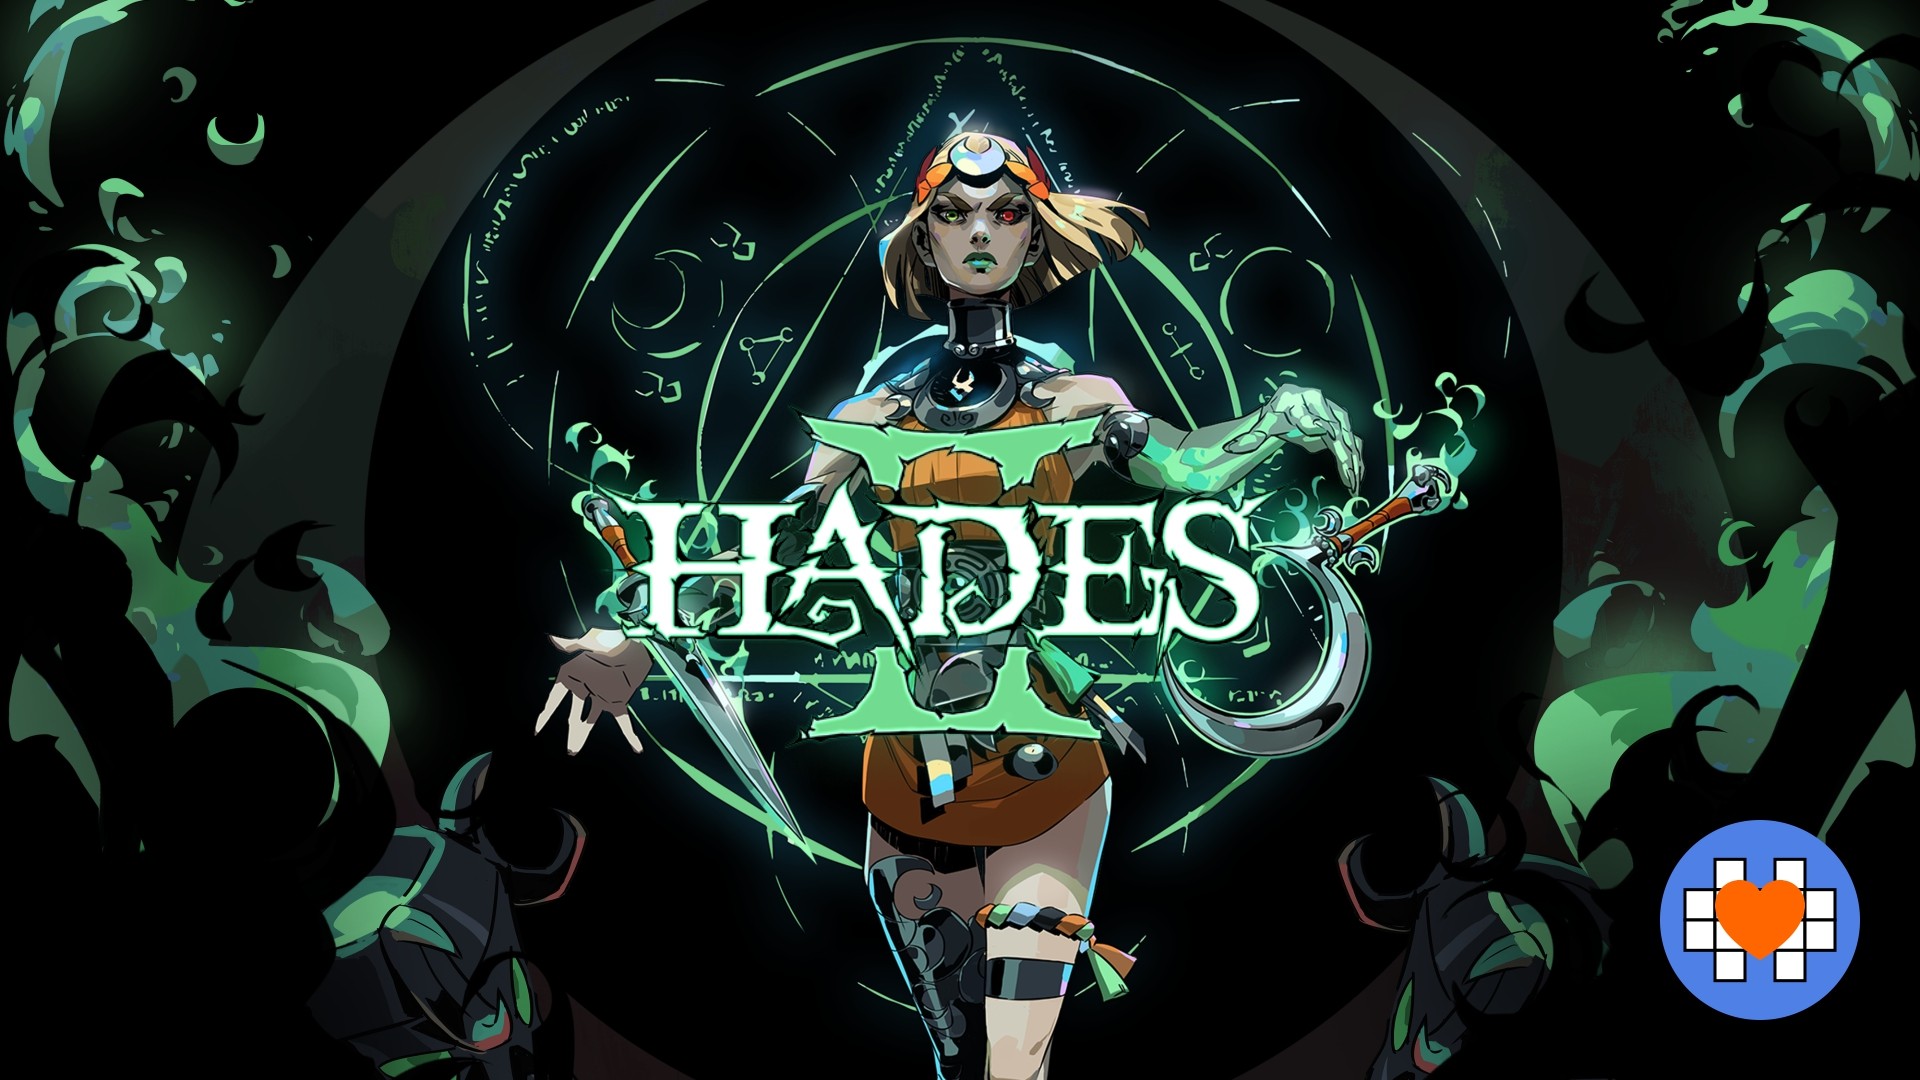 HADES 2 officially revealed at The Game Awards 2022